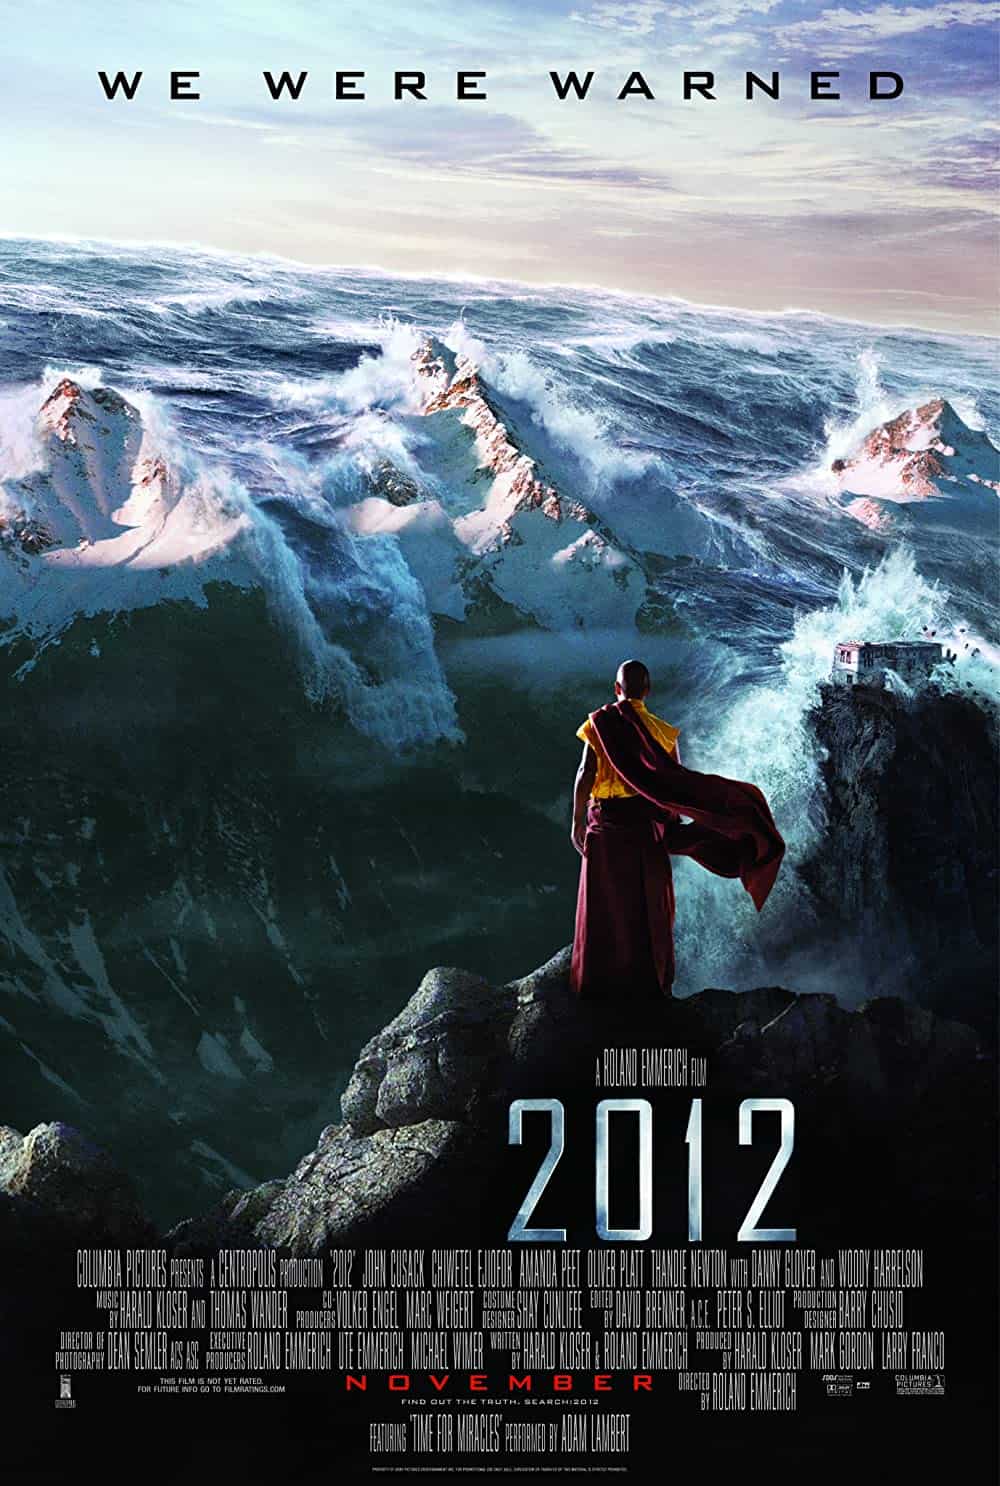 Best End of the World Movies You Can't Miss 2012 (2009)